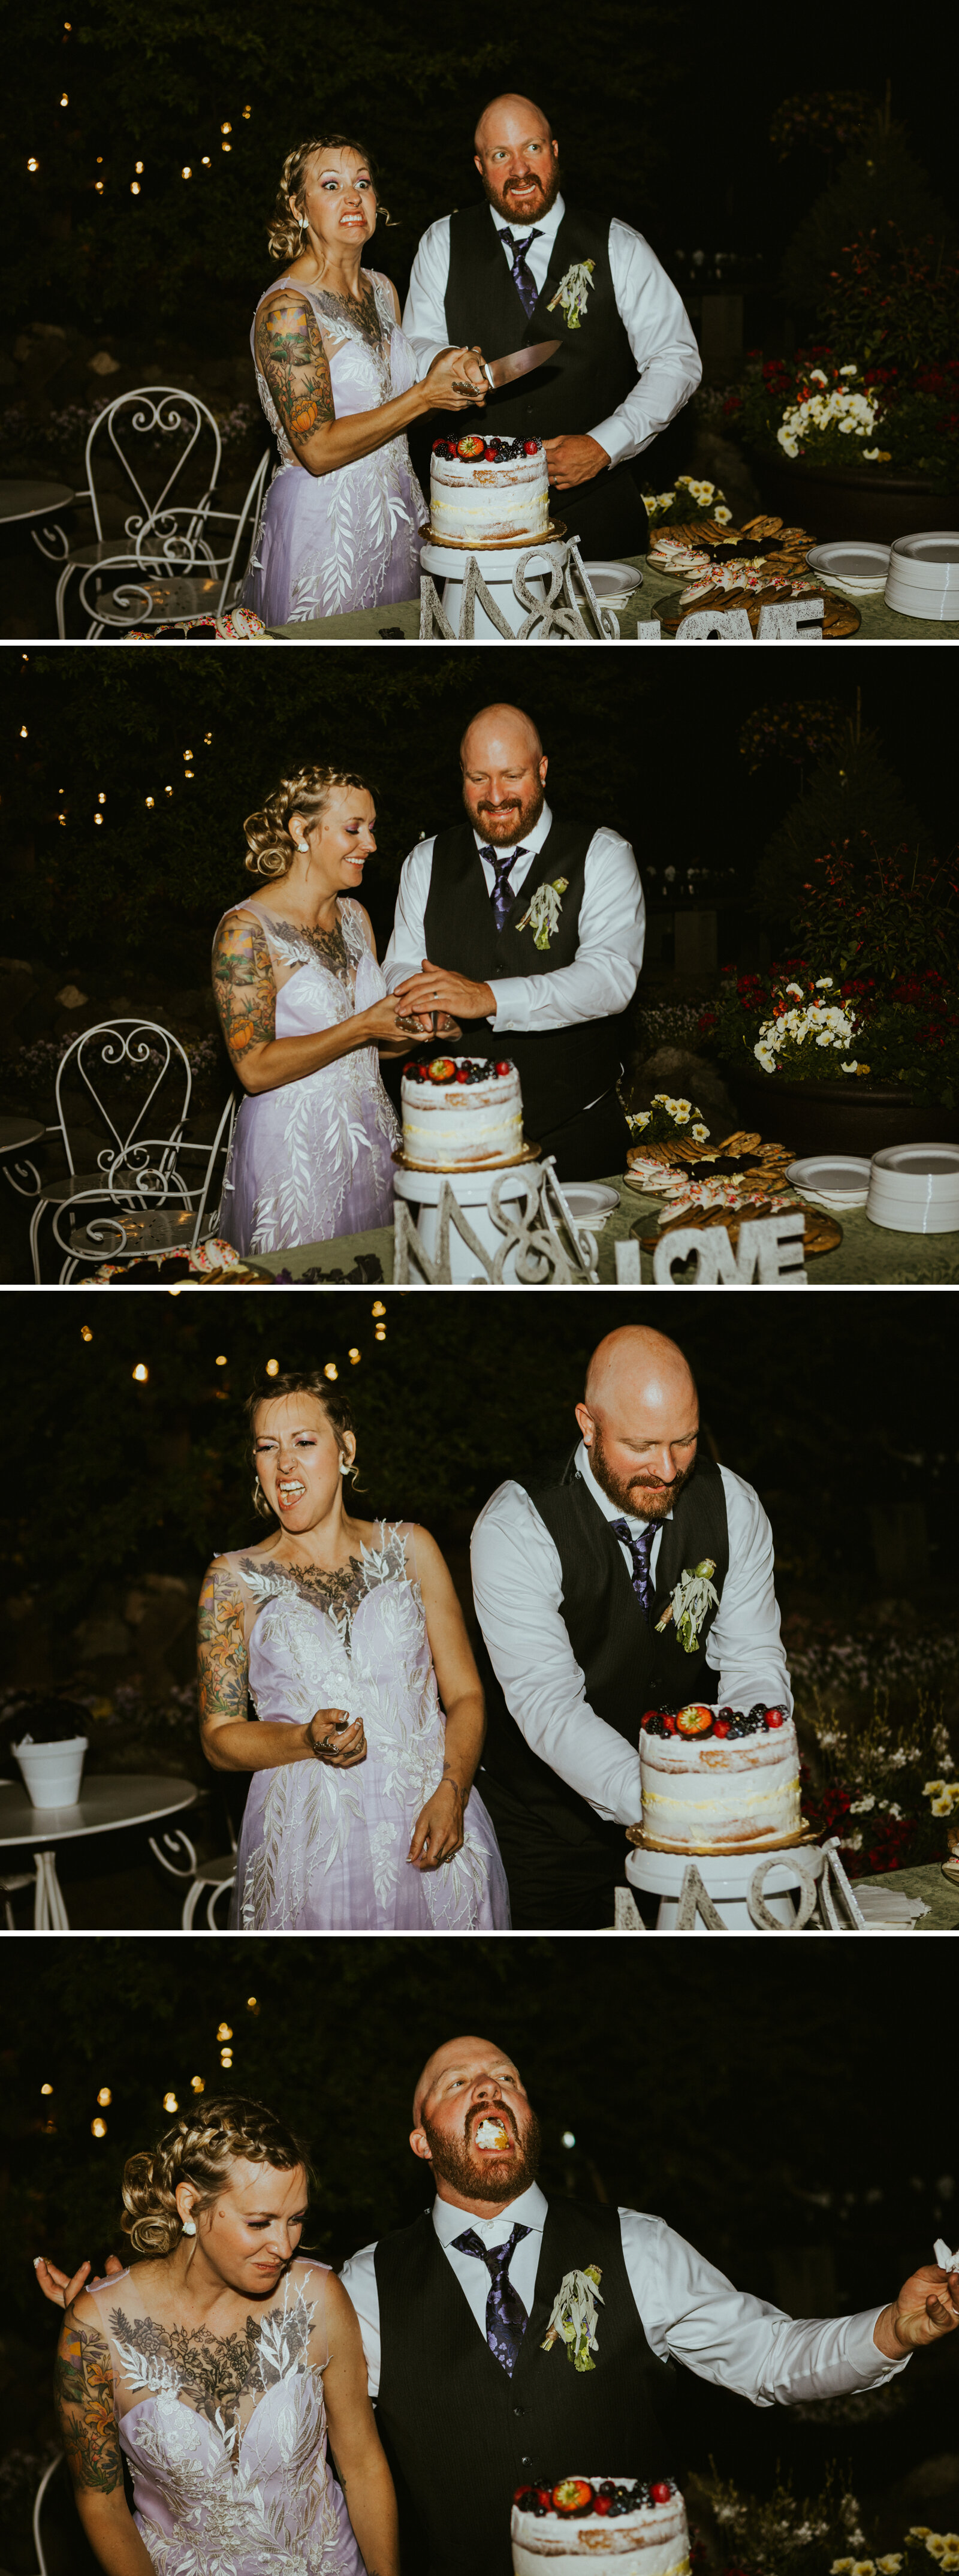 a bride and groom cutting their cake during their wedding reception making silly faces.jpg